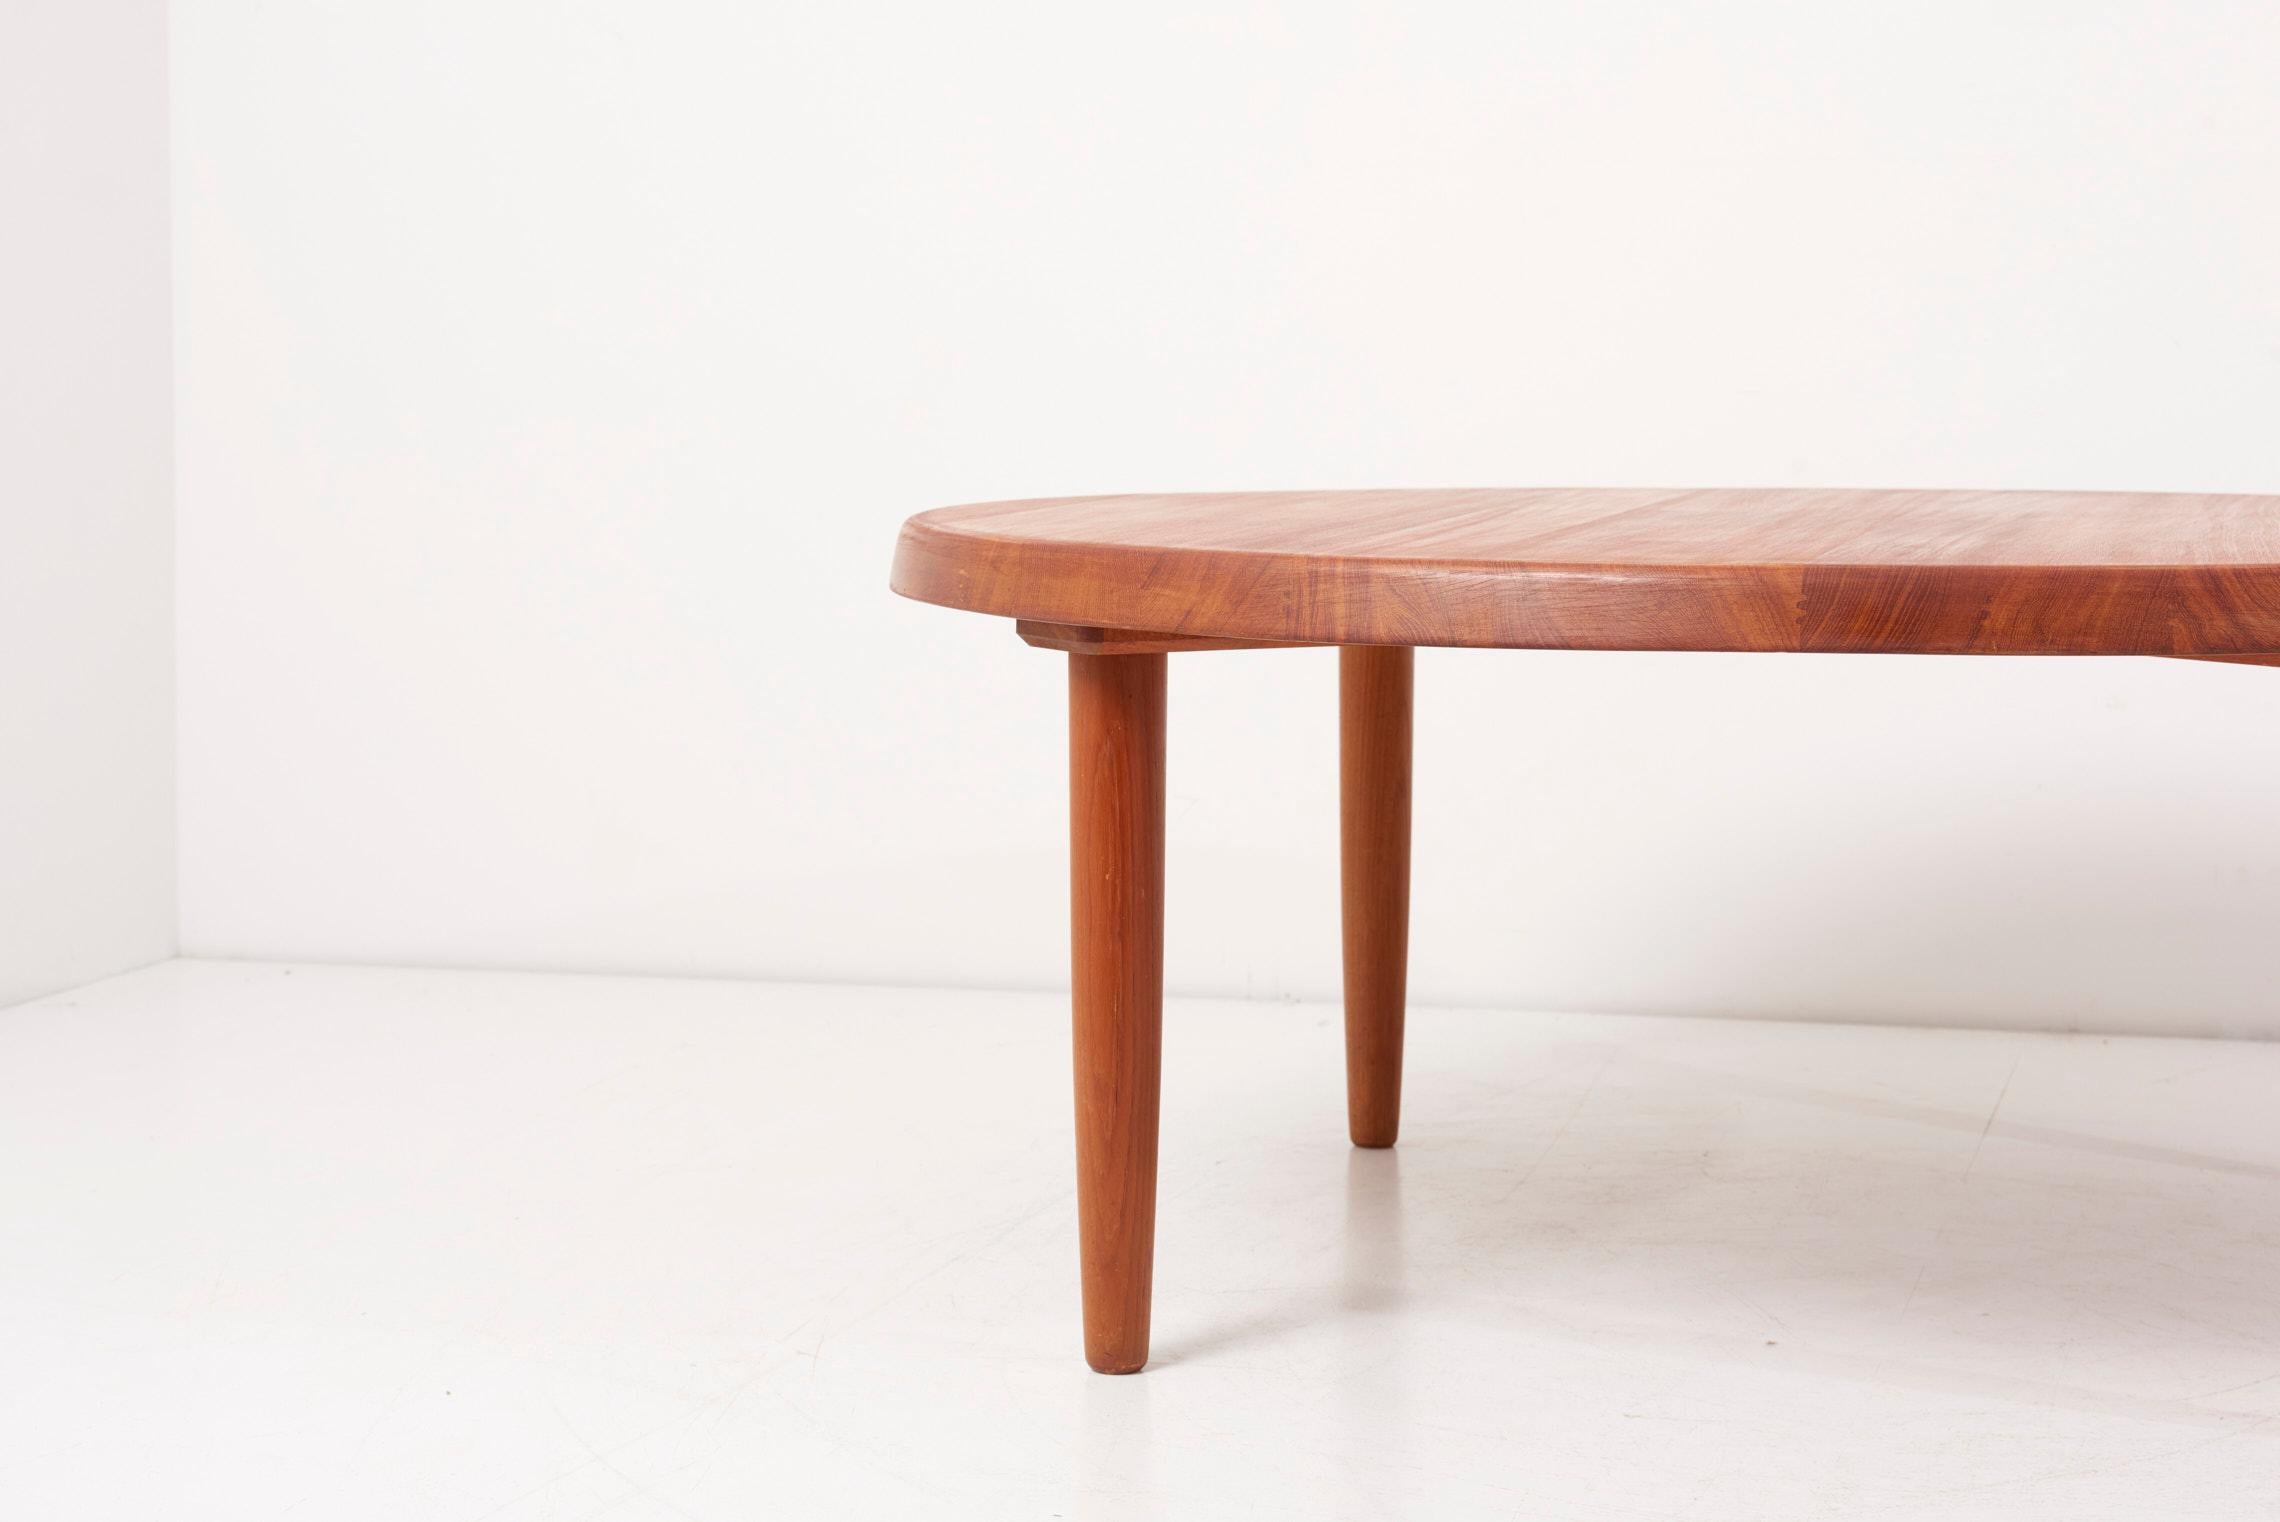 Large Solid Teak Coffee Table, 1960s Denmark For Sale 2